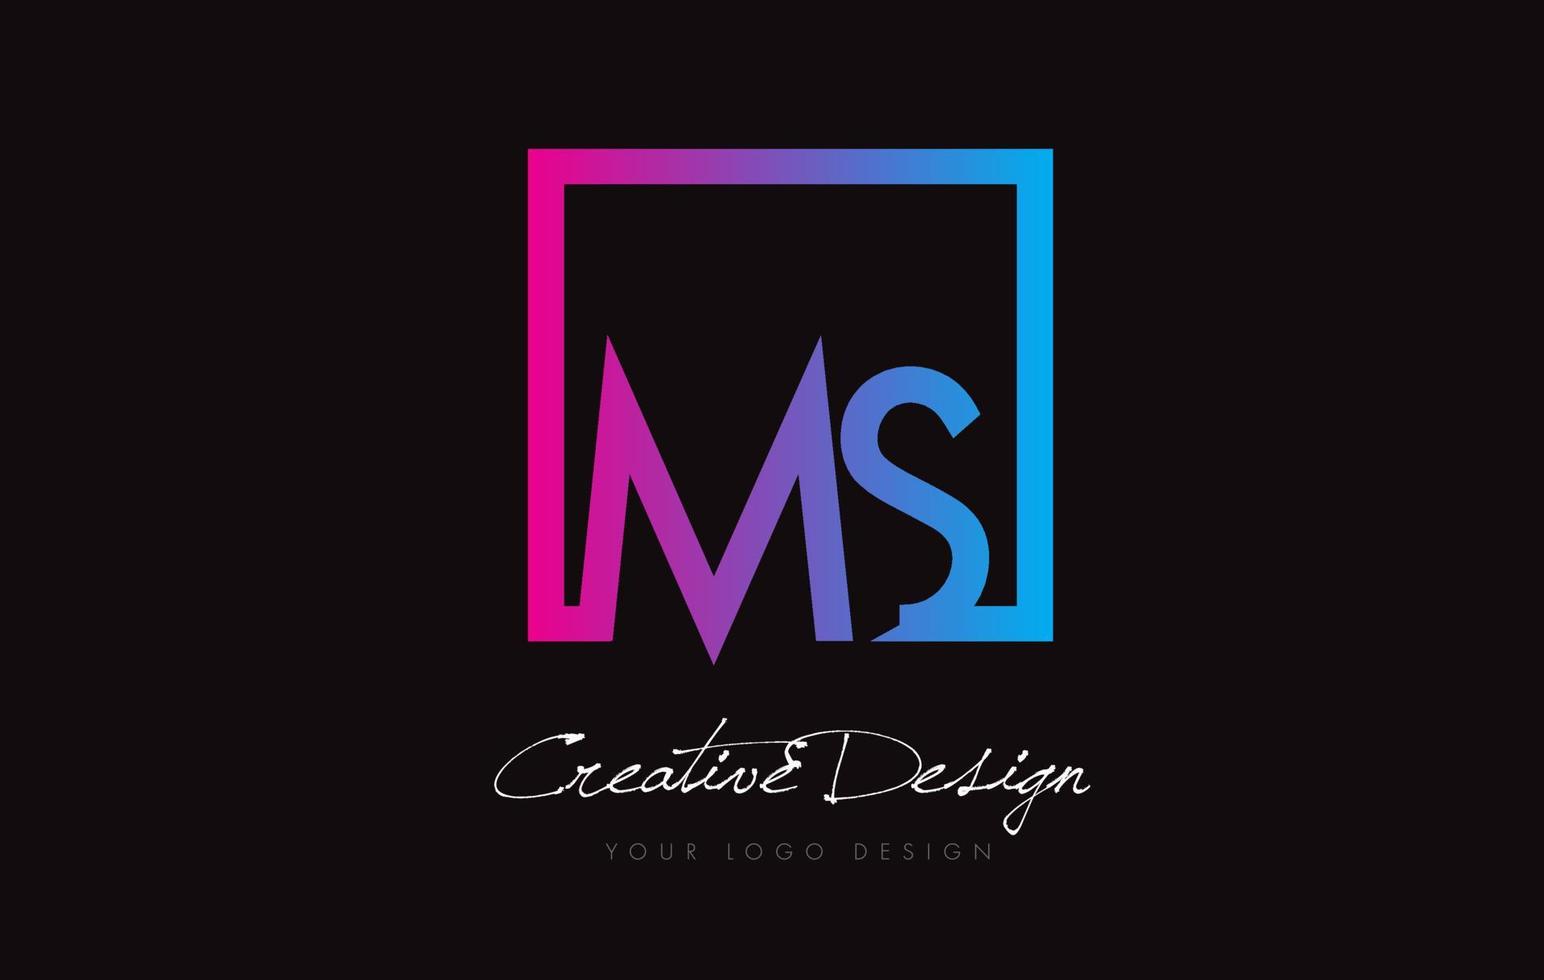 MS Square Frame Letter Logo Design with Purple Blue Colors. vector